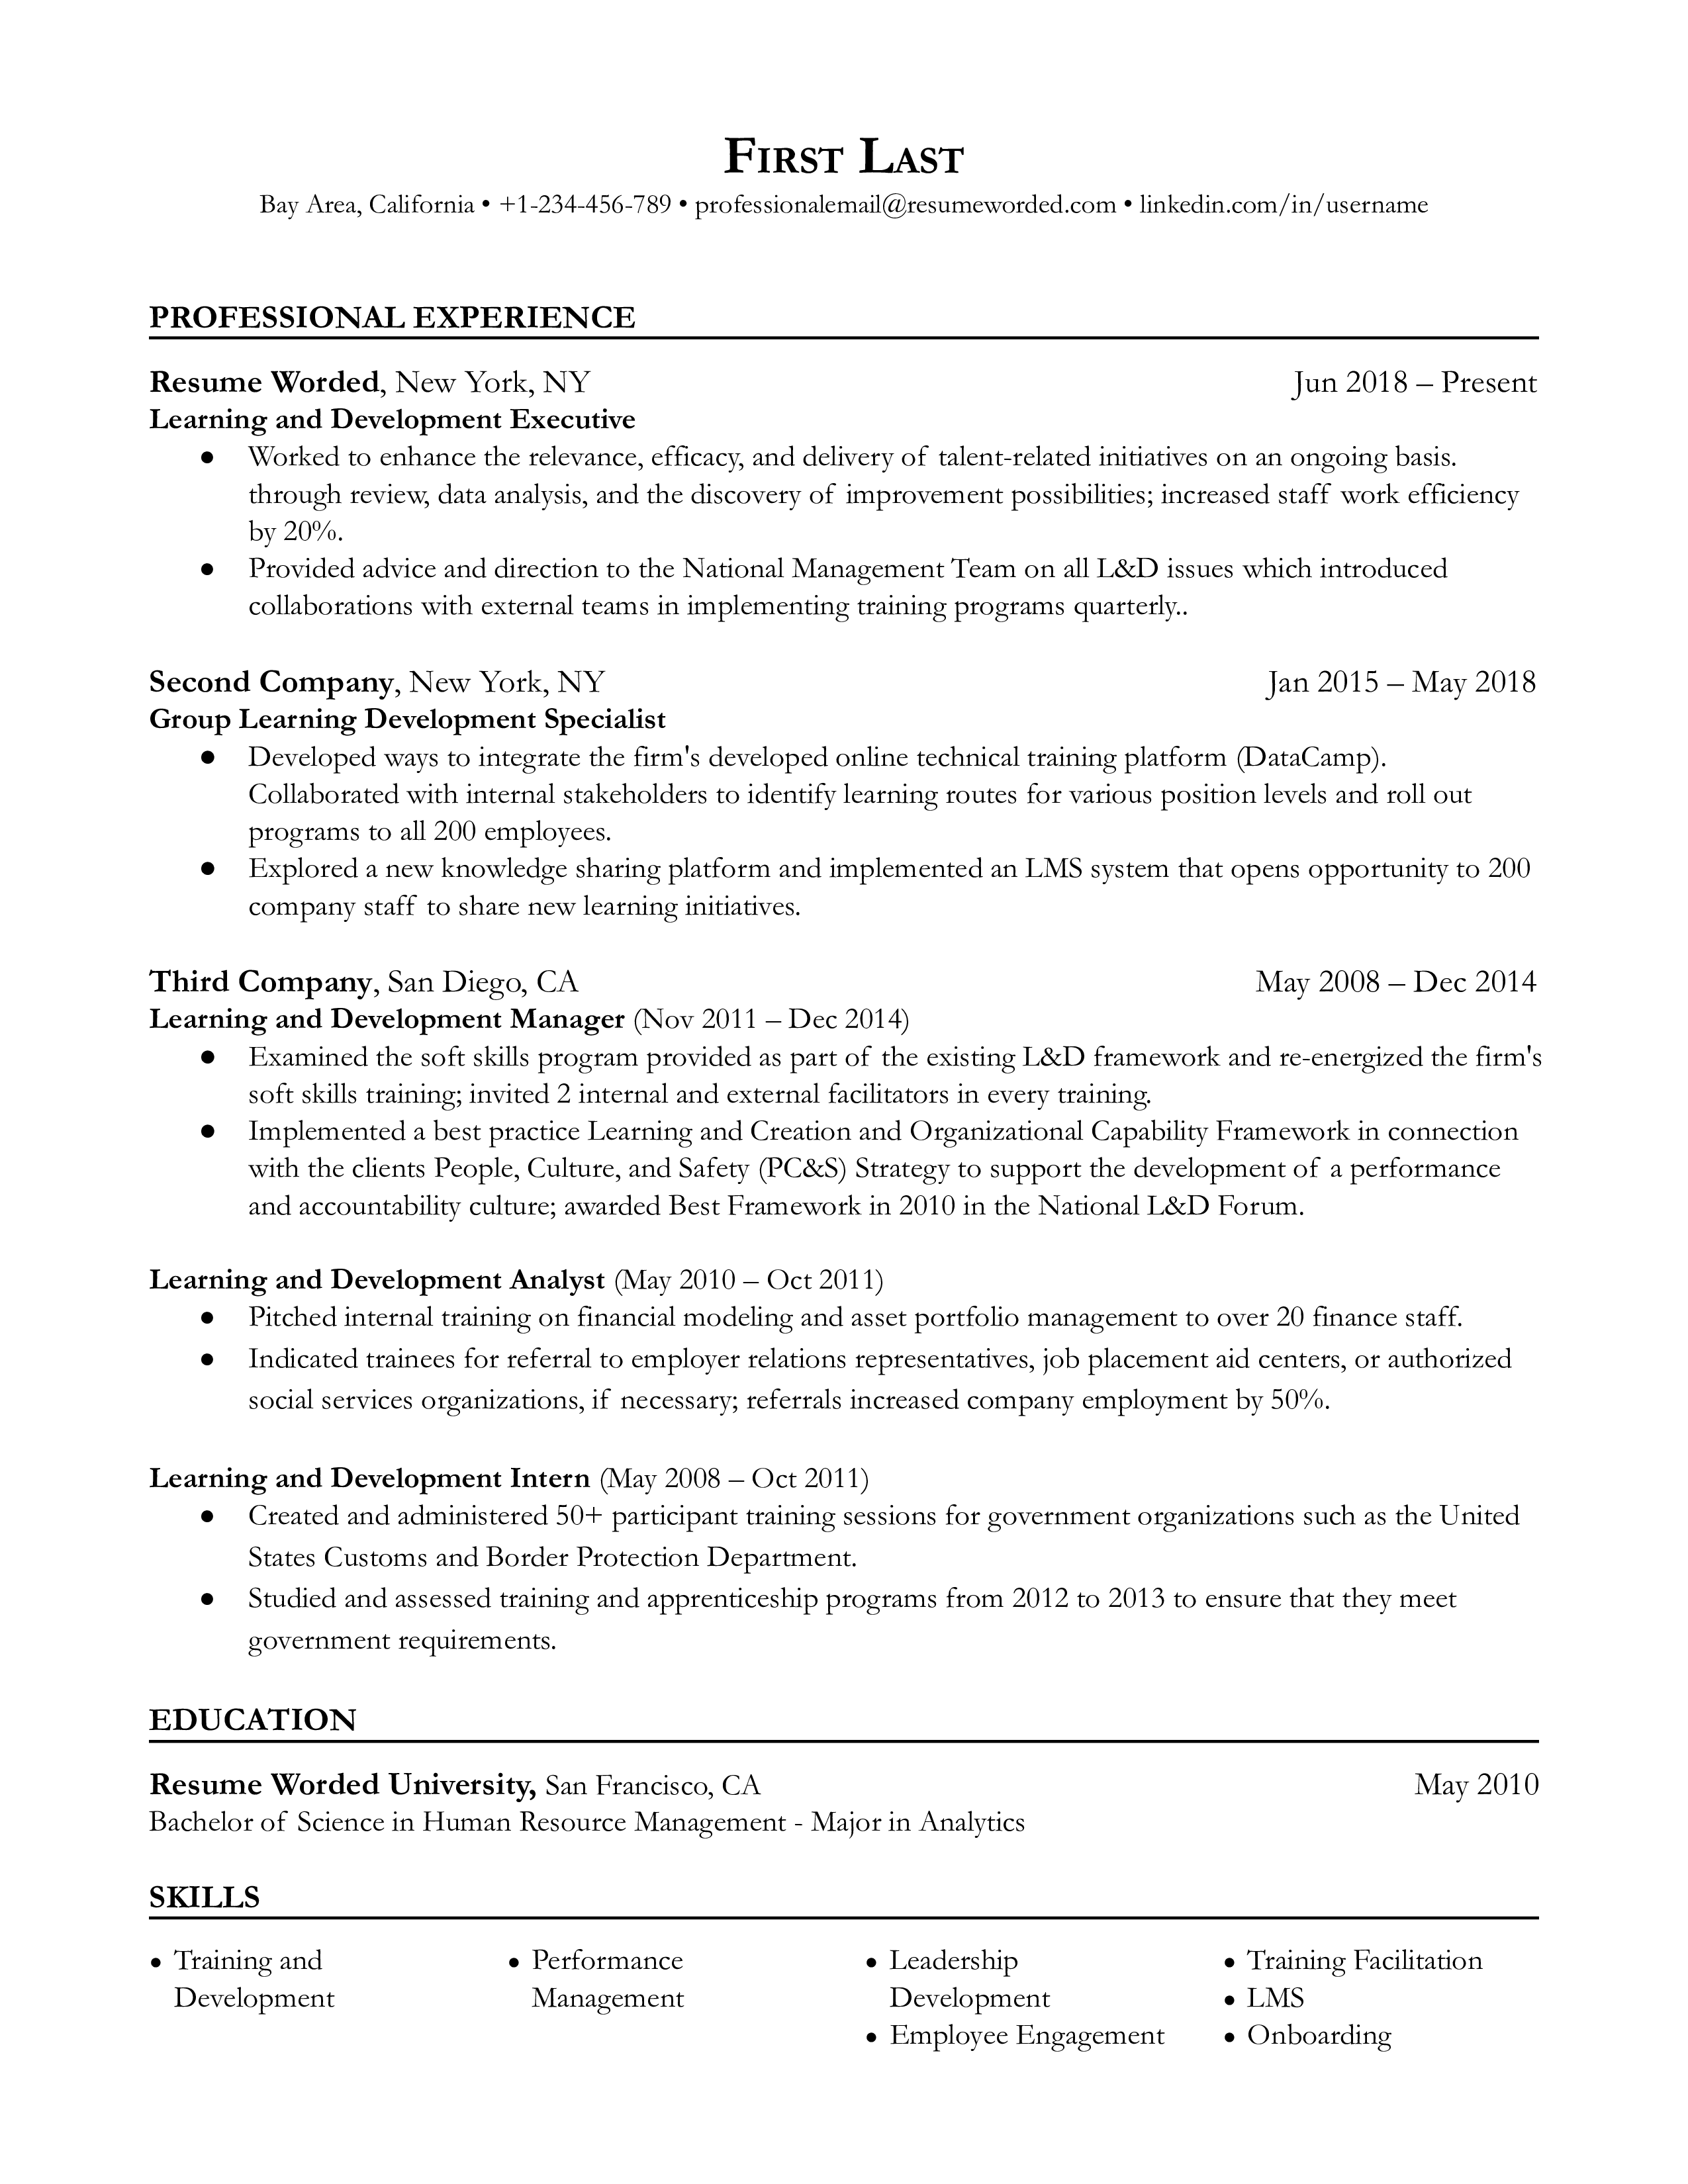 Learning and Development Executive Resume Template + Example